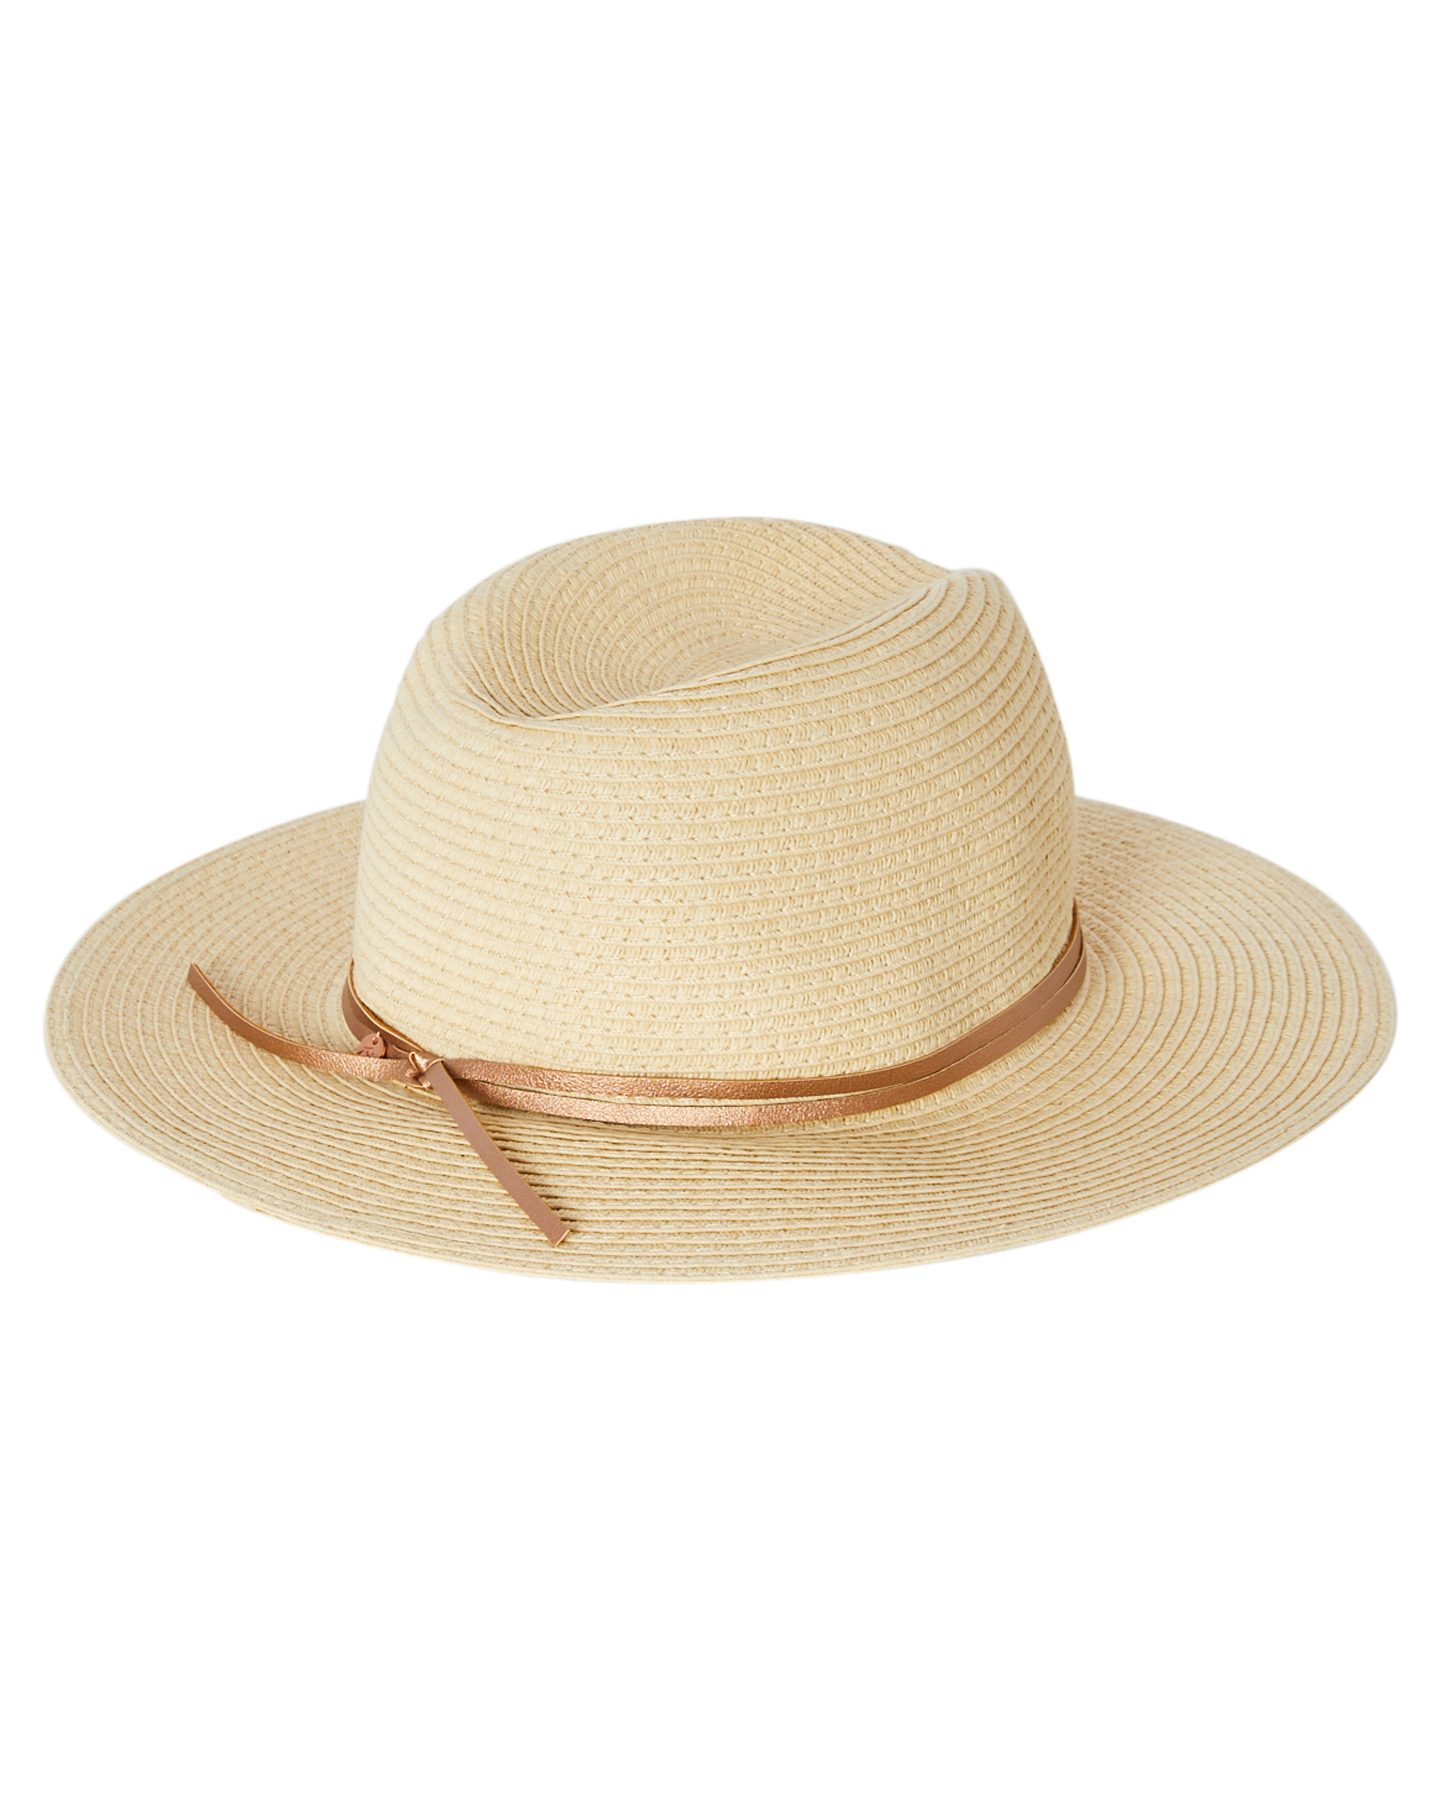 Rusty Gisele Straw Hat - Natural | SurfStitch